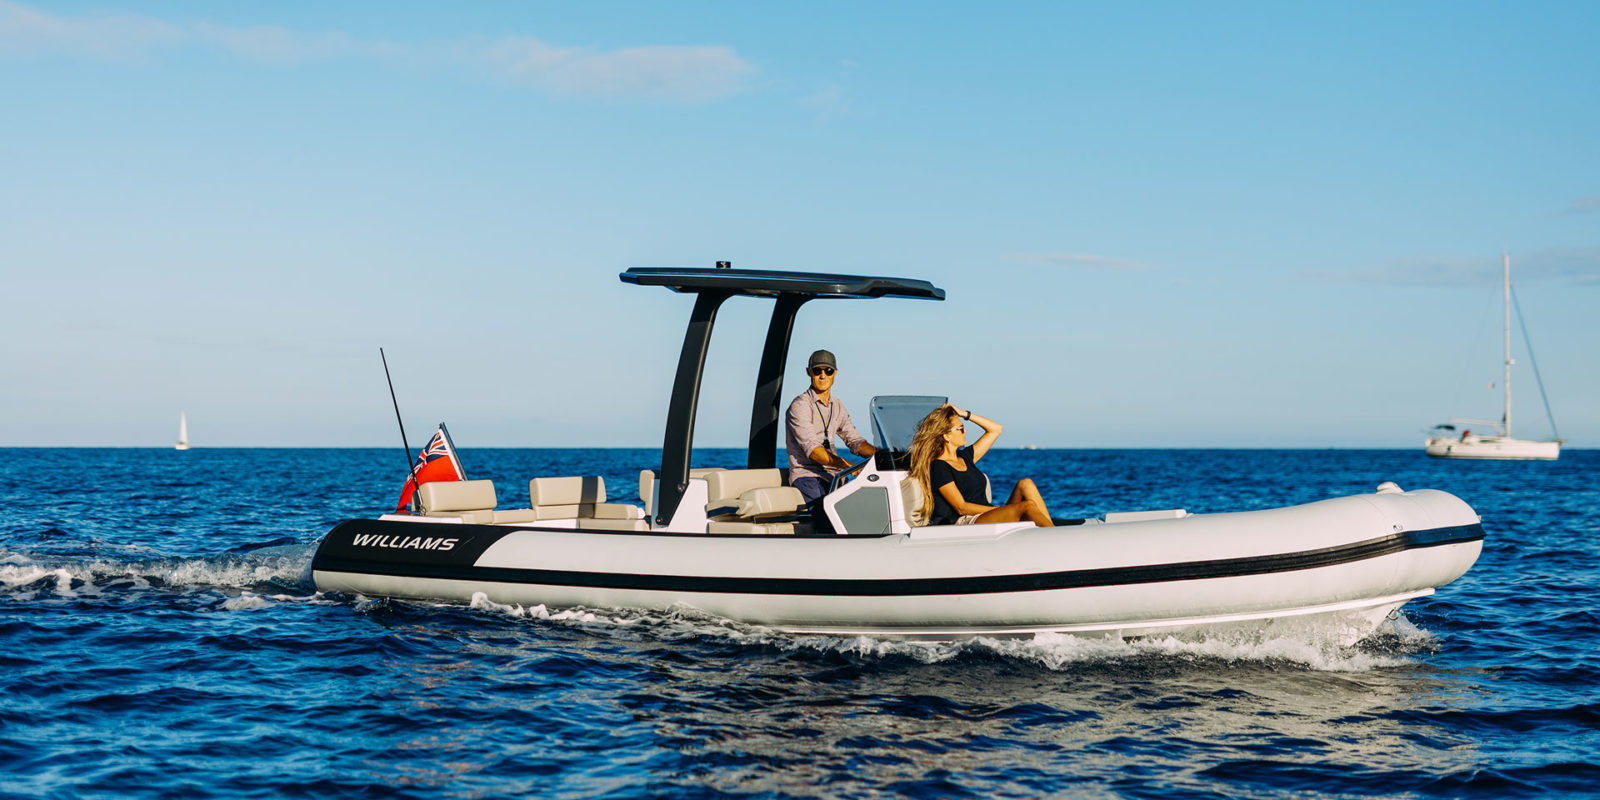 Williams Tenders USA Debuts the All-new EvoJet in Florida